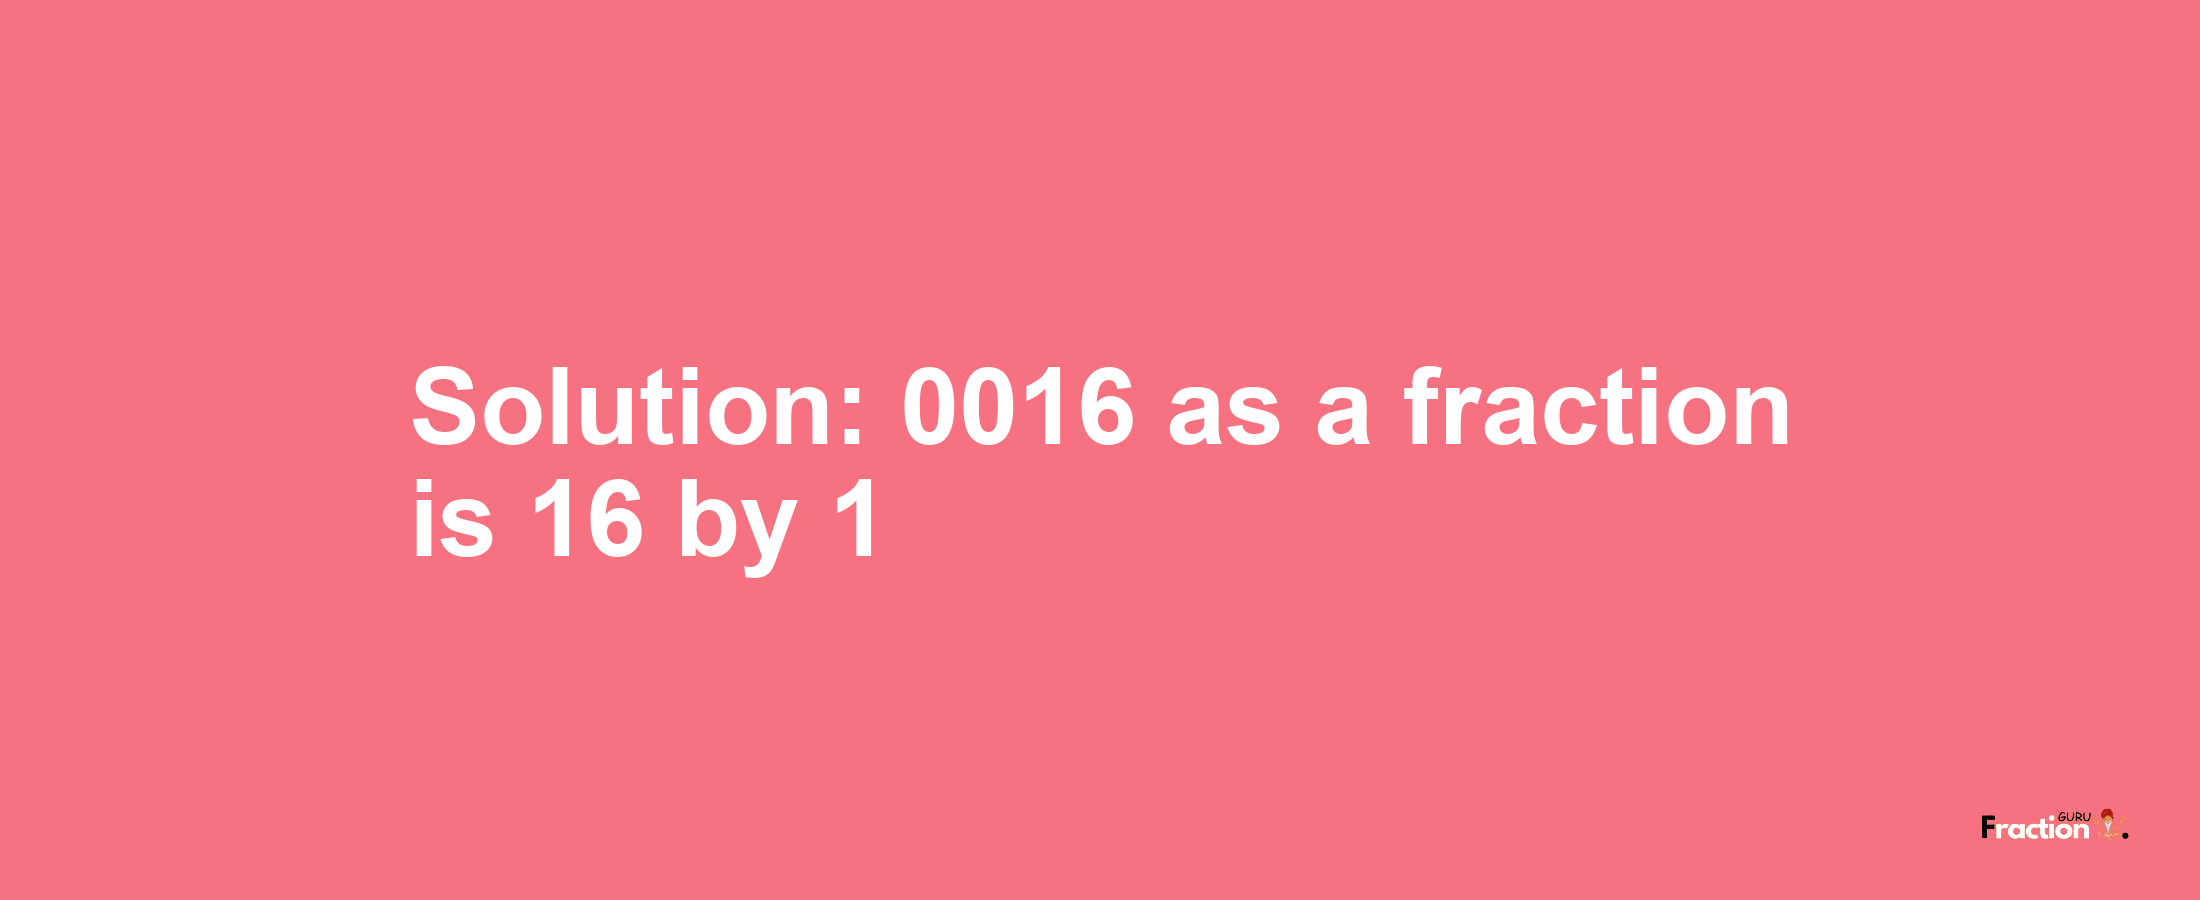 Solution:0016 as a fraction is 16/1